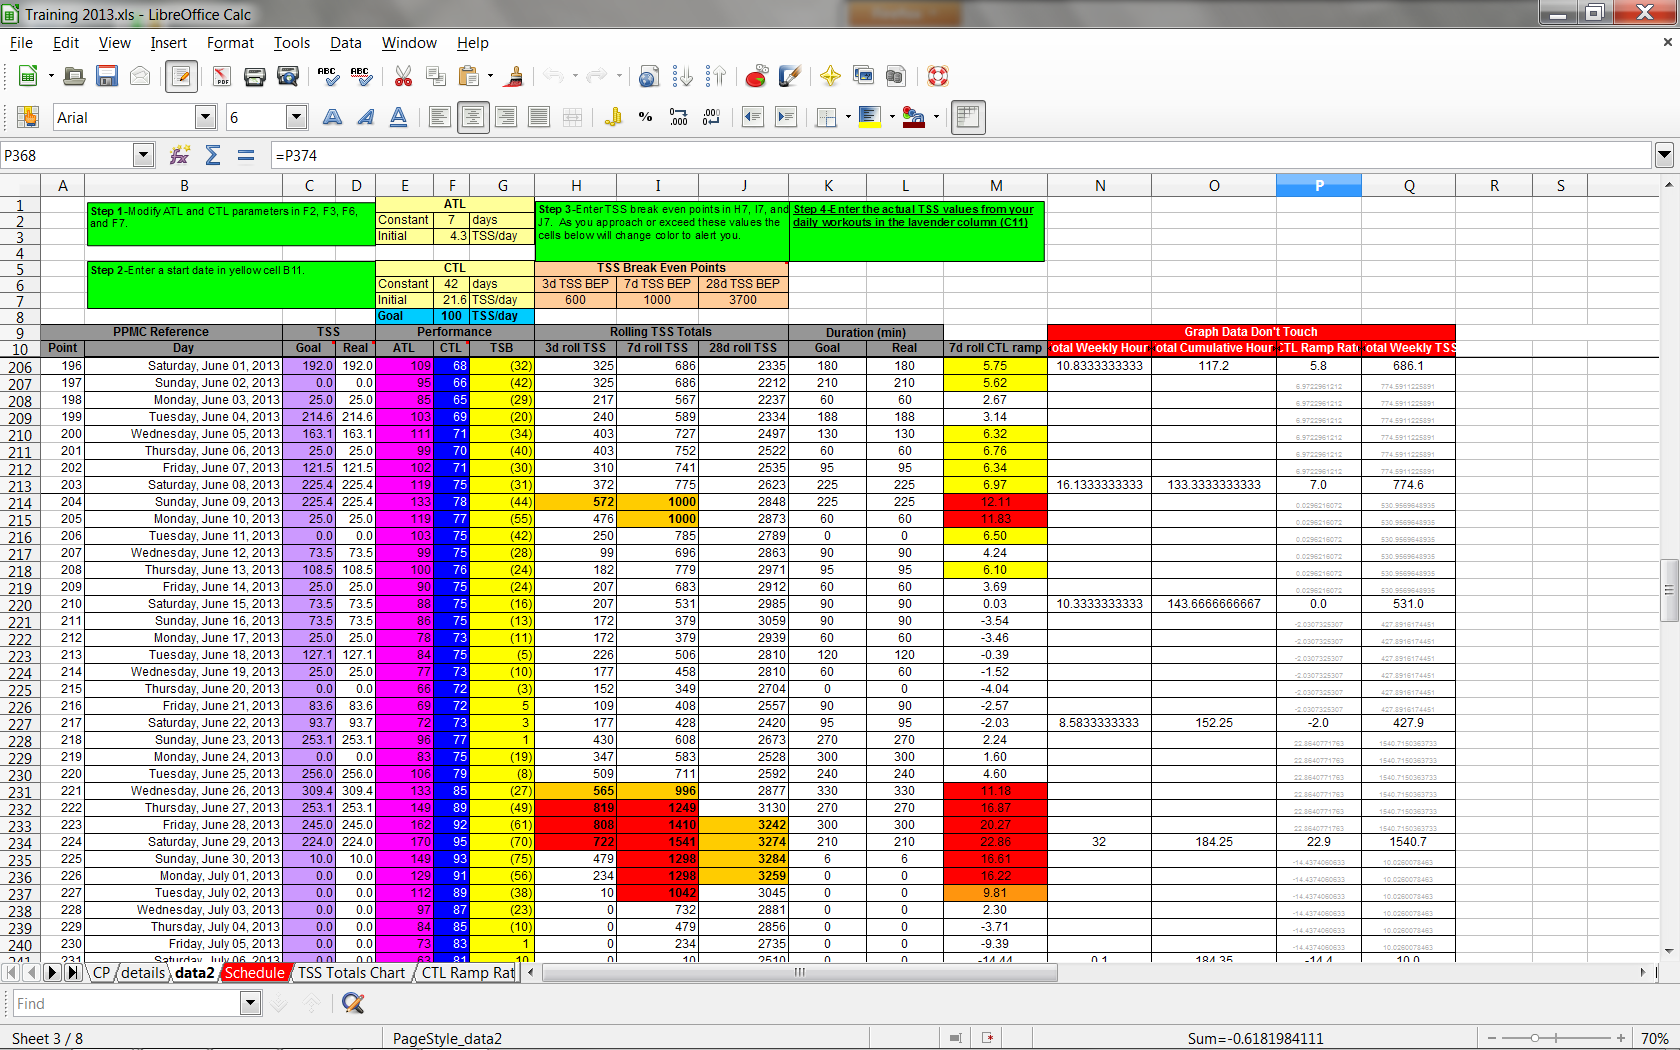 Excel Training Planner Setark0s with regard to Cycling Training Plan Template Xls